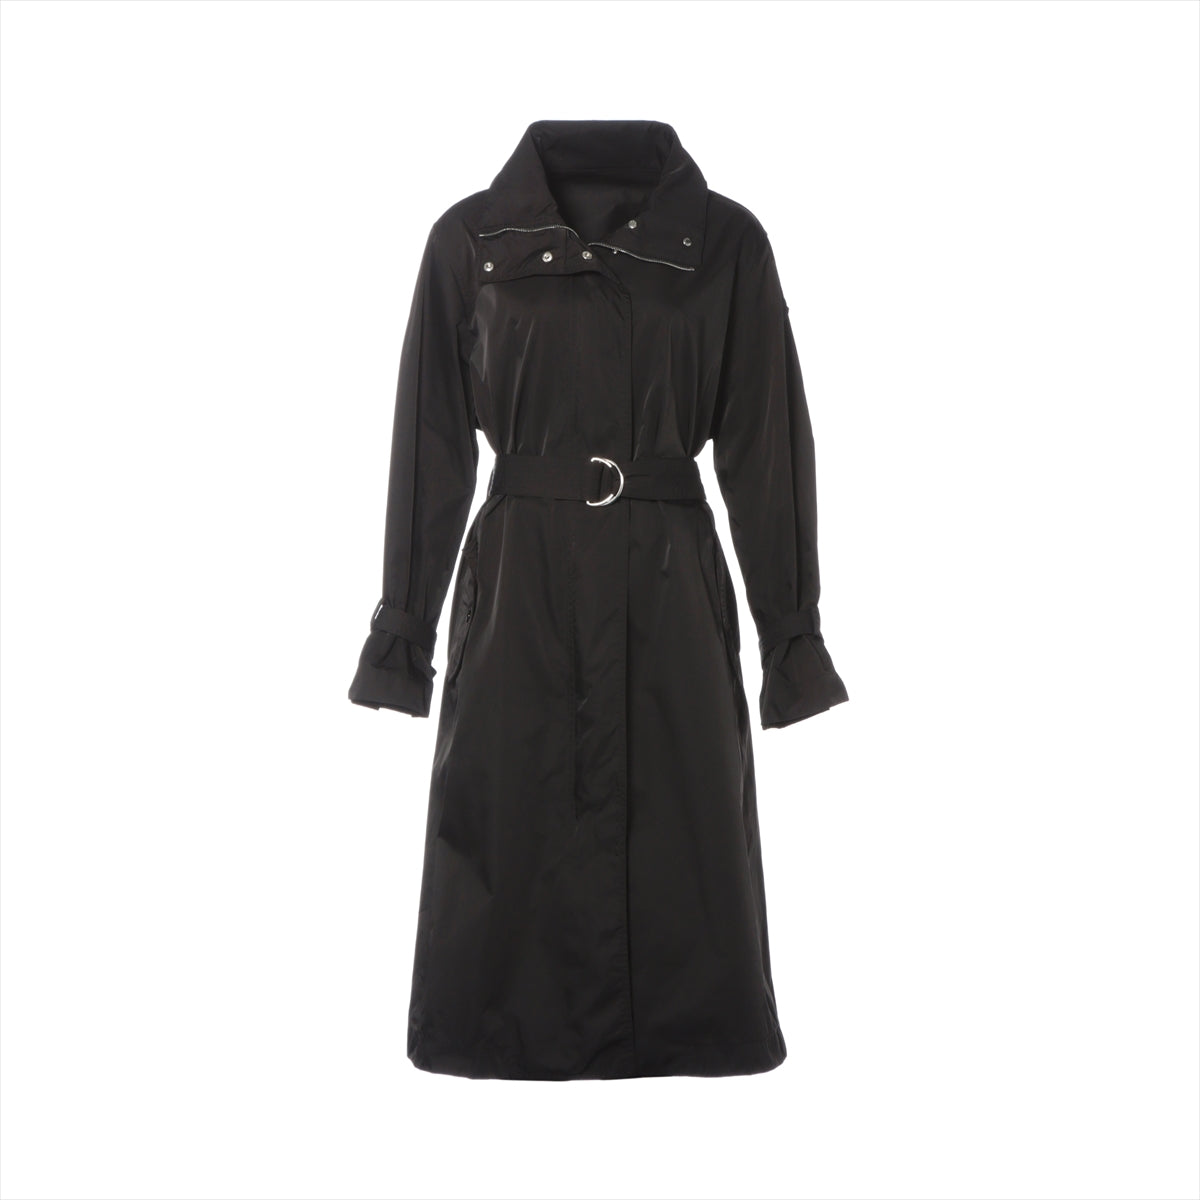 Moncler TOURGEVILLE 21 years Polyester coats 00 Ladies' Black  Zip up belted